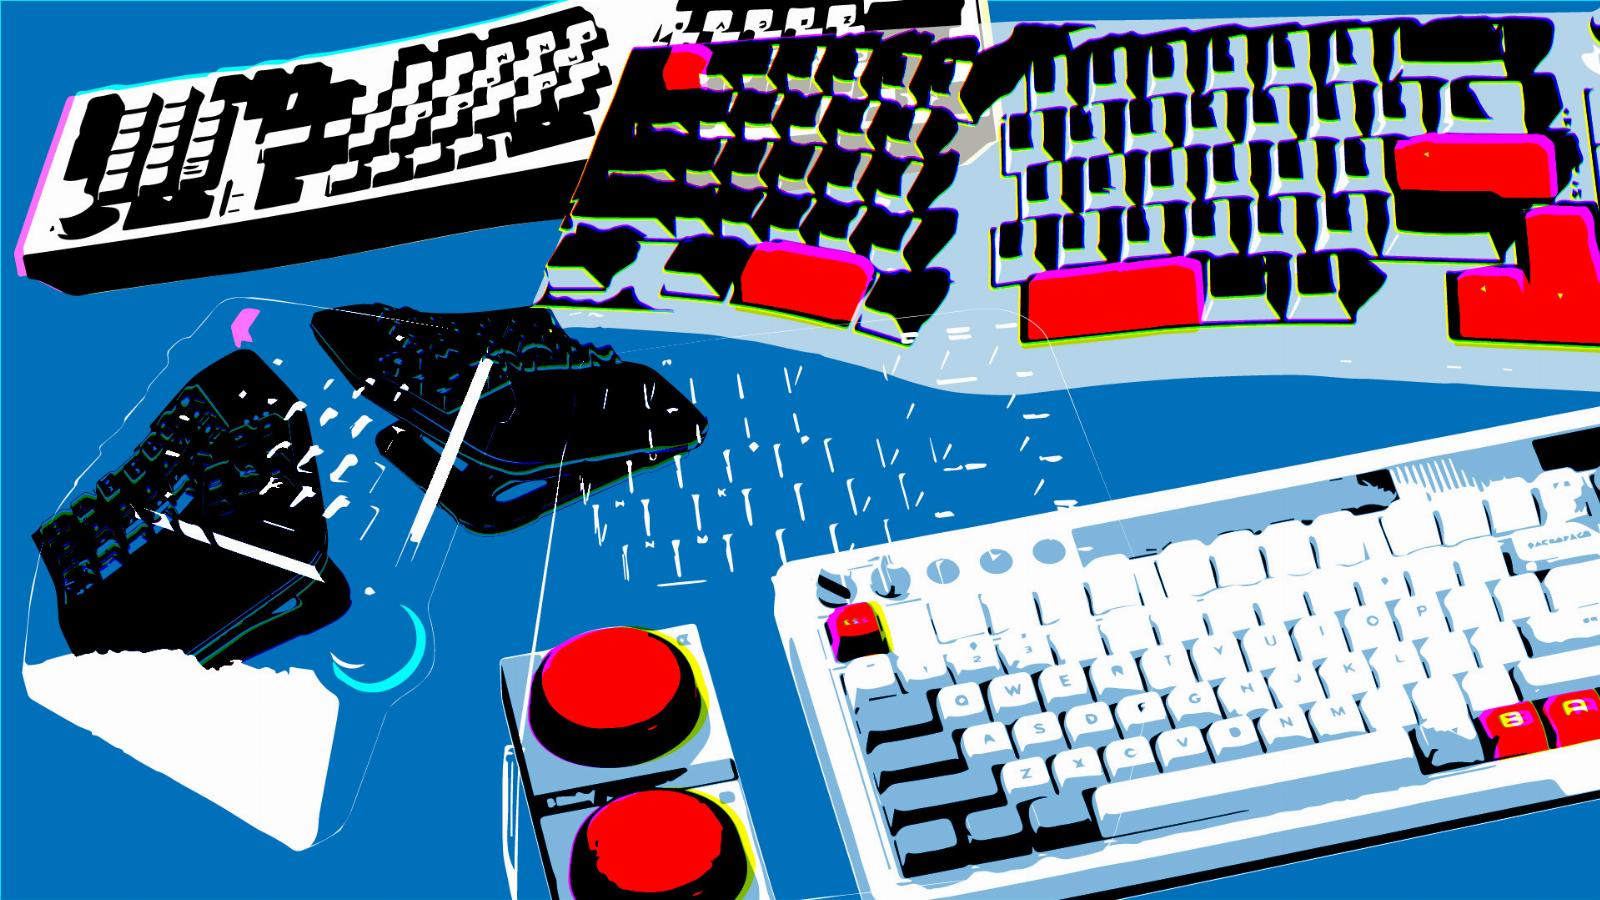 Spice up your desktop with these unusual keyboards from Keychron, HHKB, Cloud Nine and others